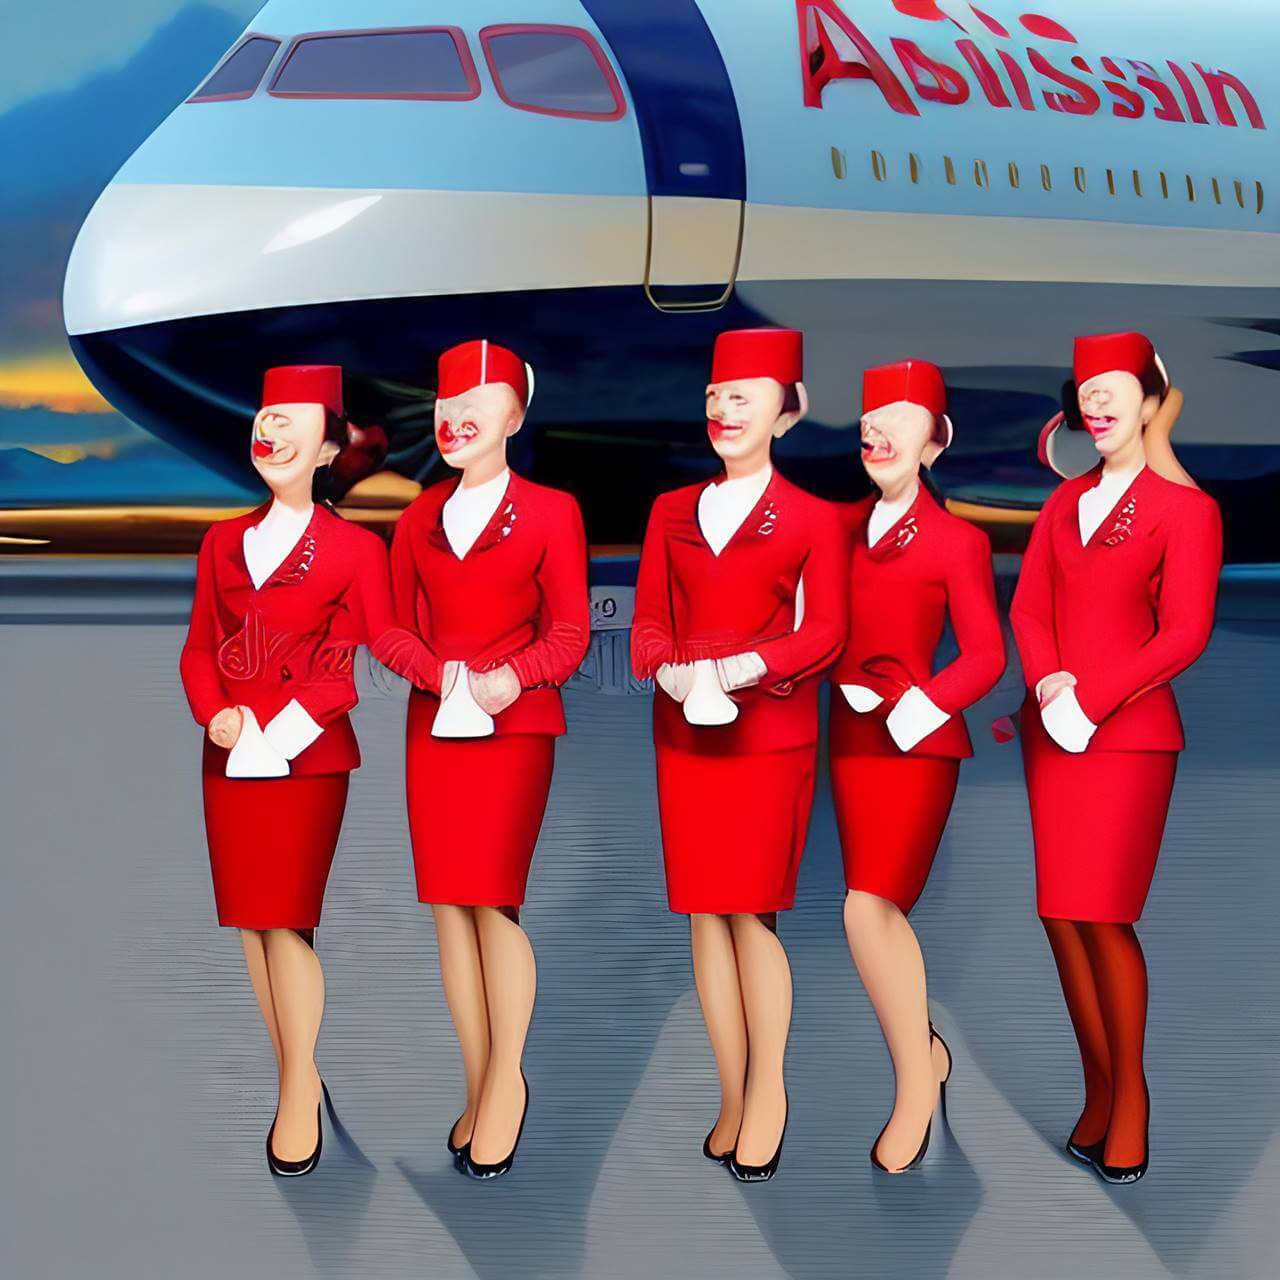 How to become a cabin crew in Austria